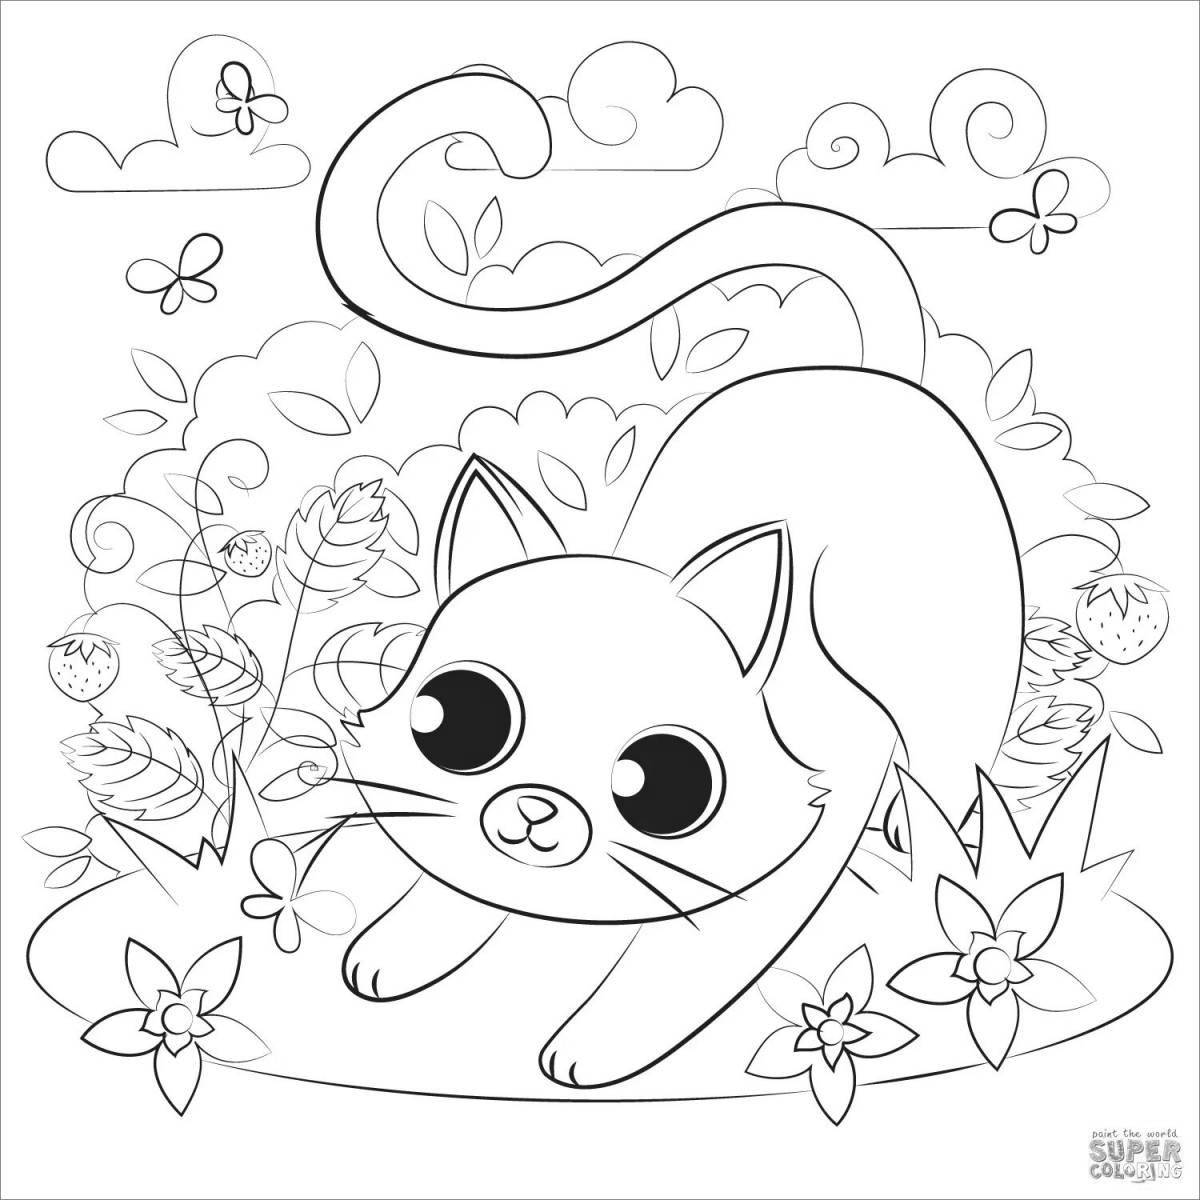 Kitty live coloring for children 6-7 years old